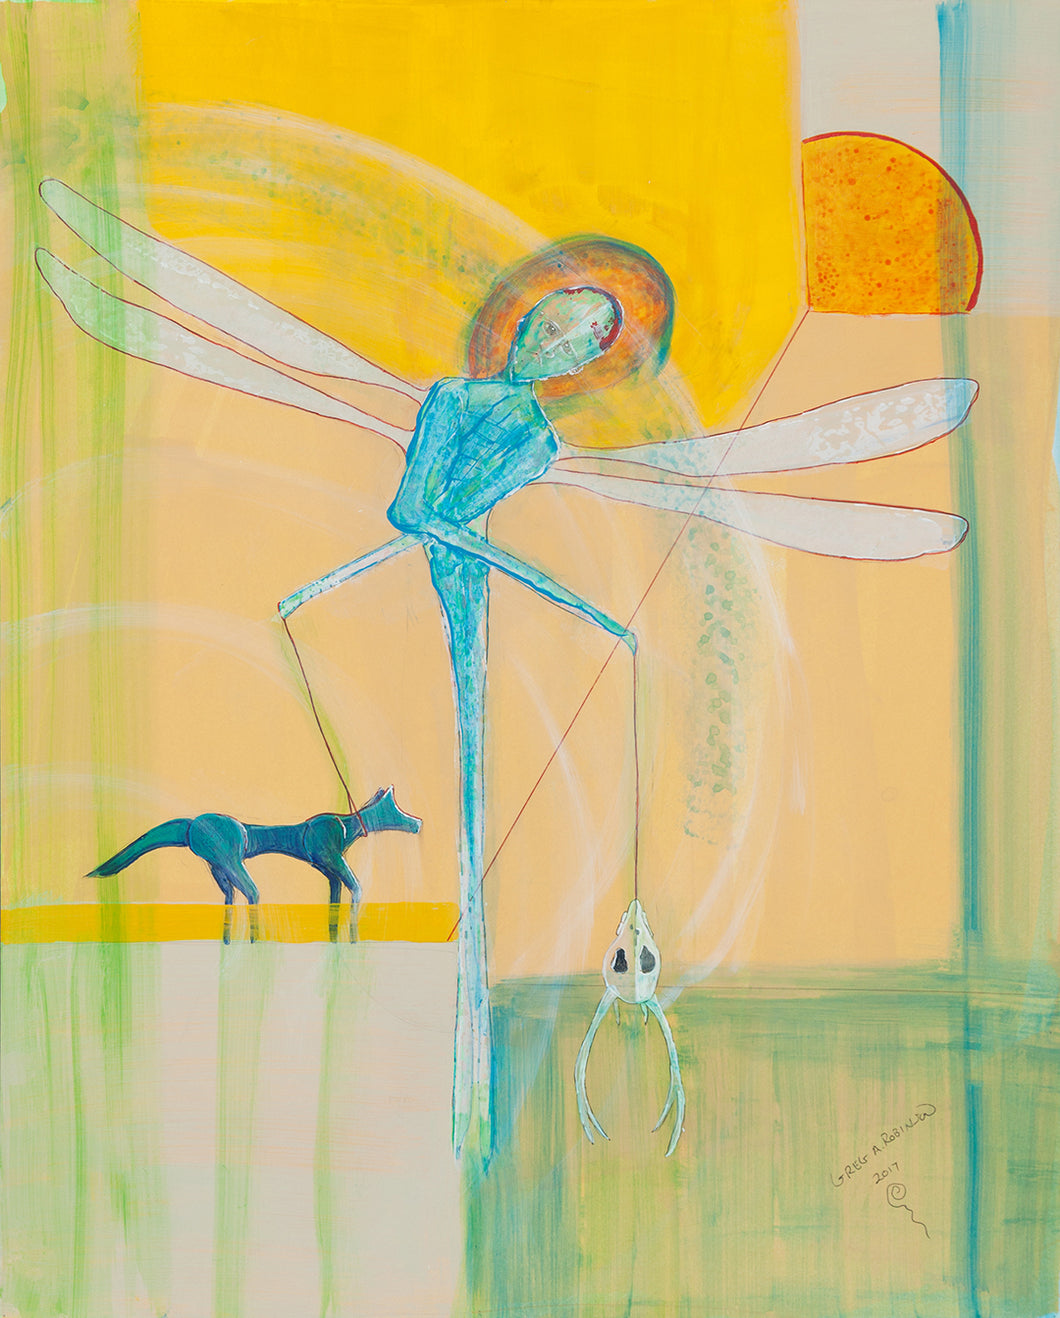 Dragonfly's Afternoon, 2018, Greg A. Robinson